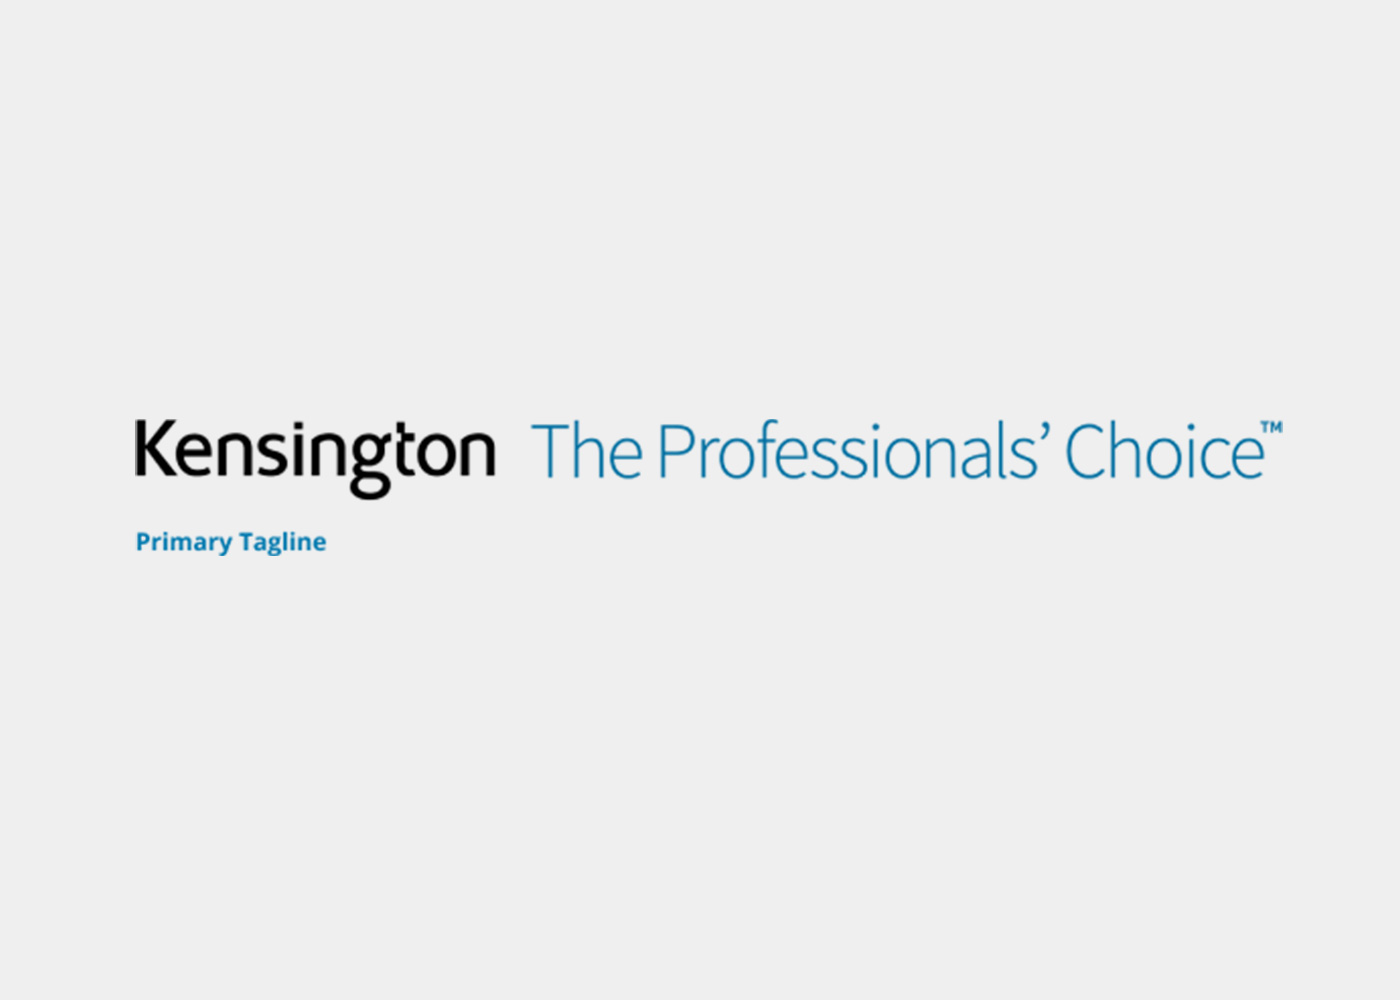 Example of Kensington logo with tagline example.